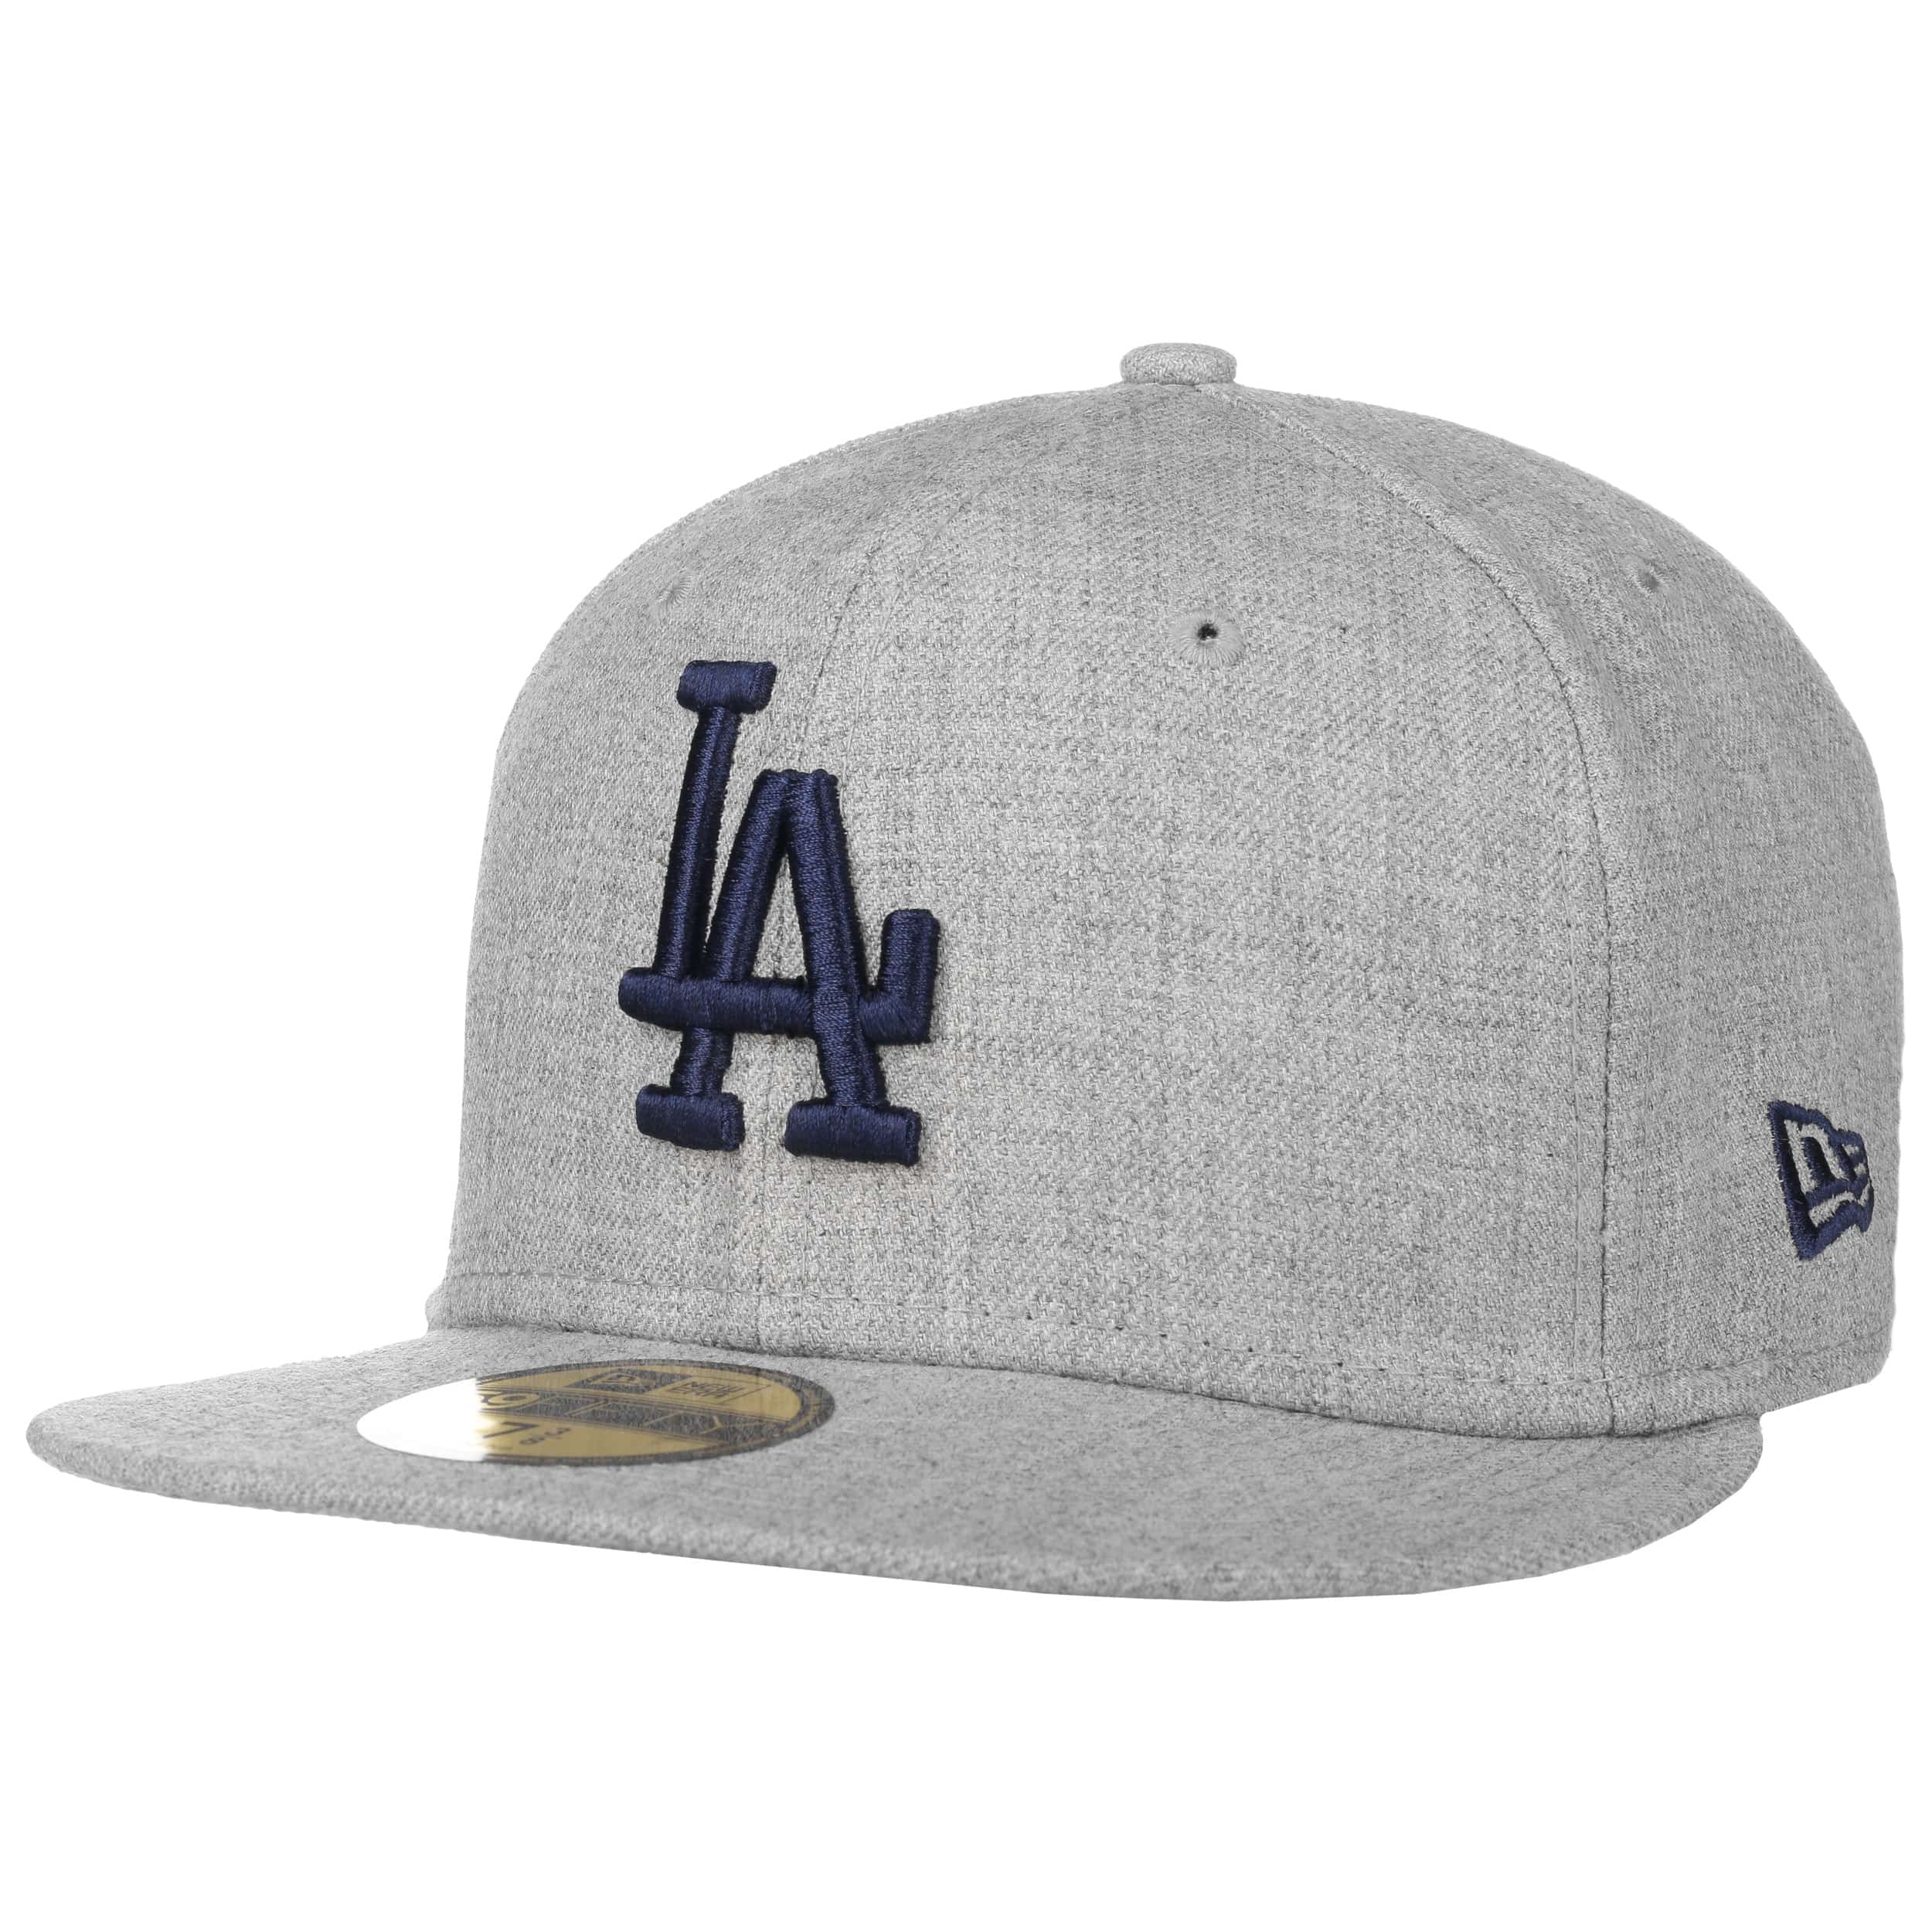 59fifty Hg Dodgers Pet By New Era 37 95